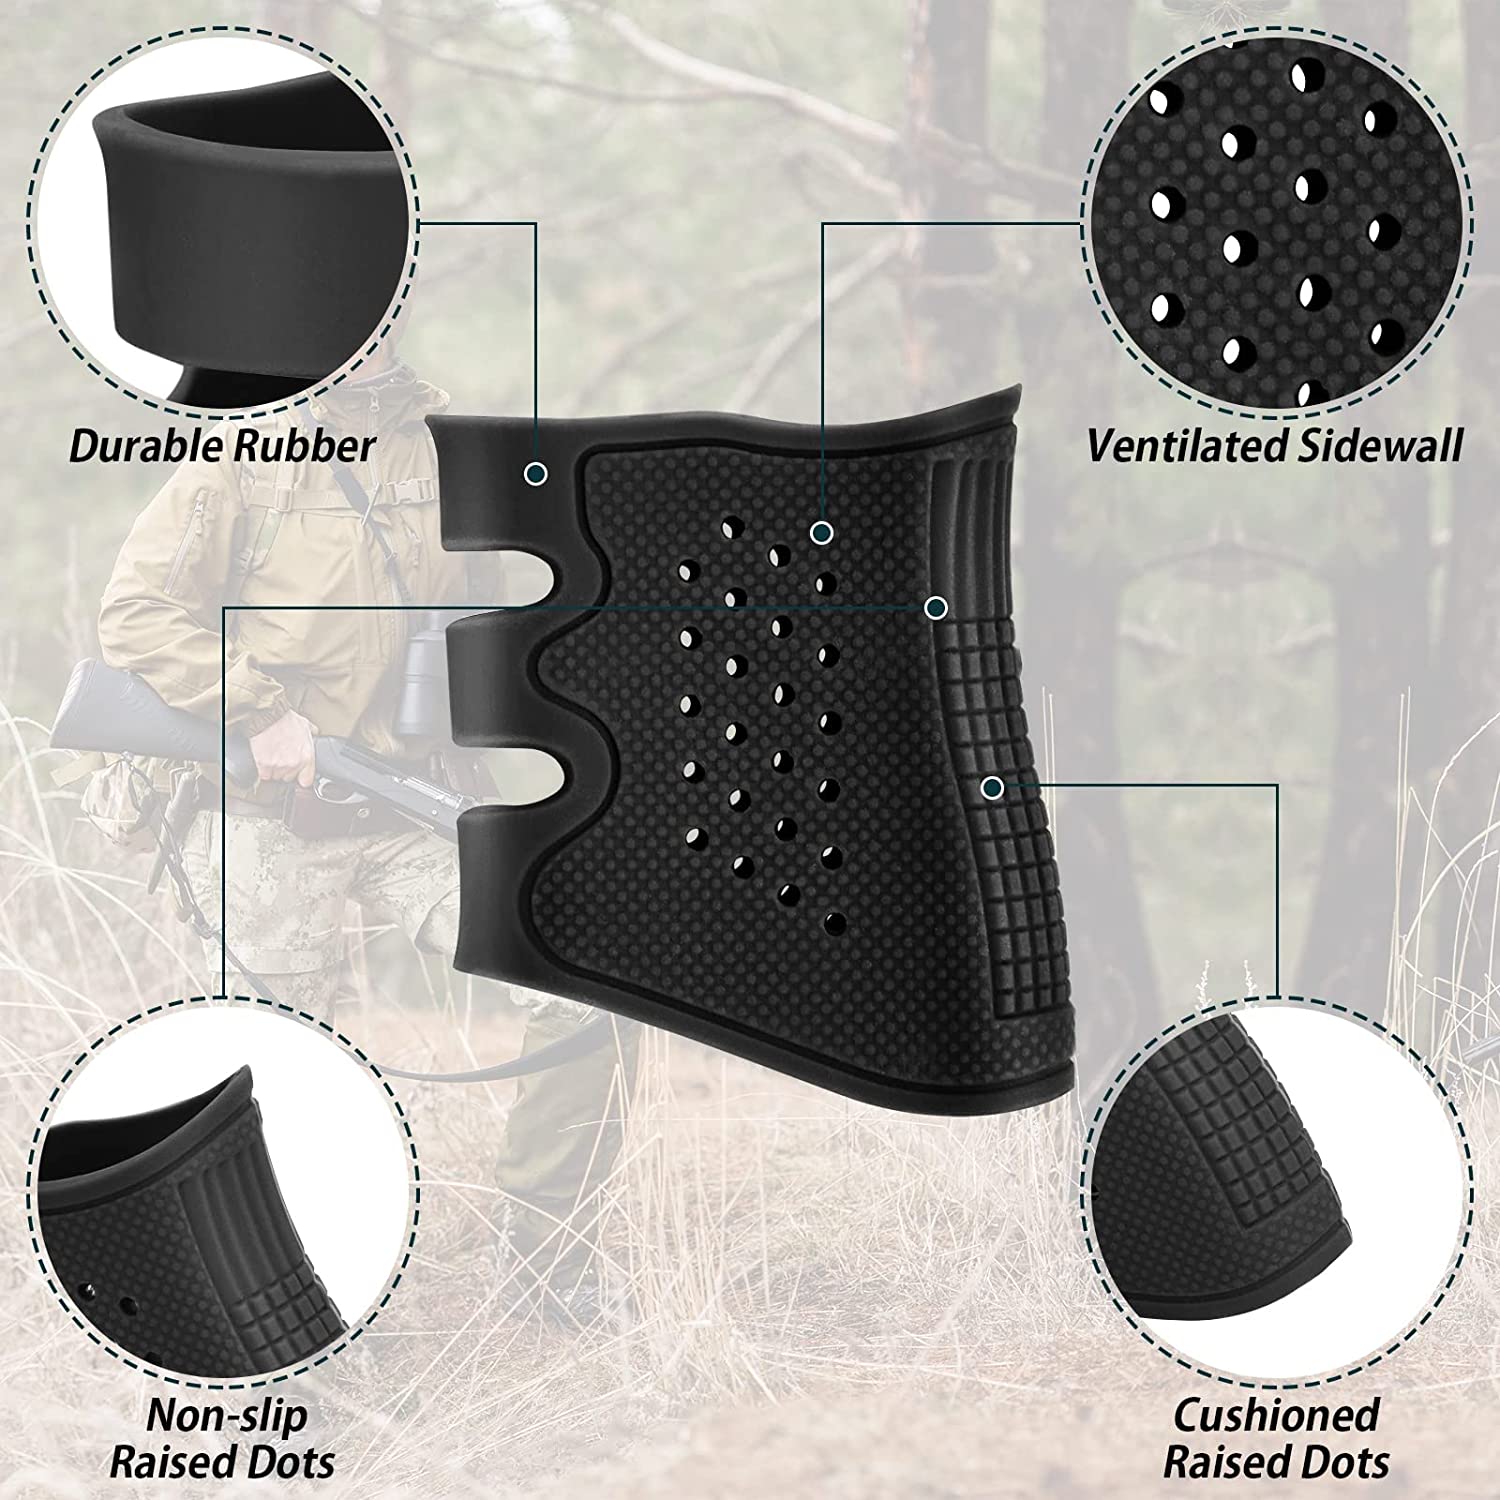 Tactical Rubber Grip Glove Sleeve Slip-On Ventilated Grip Grips for Glock